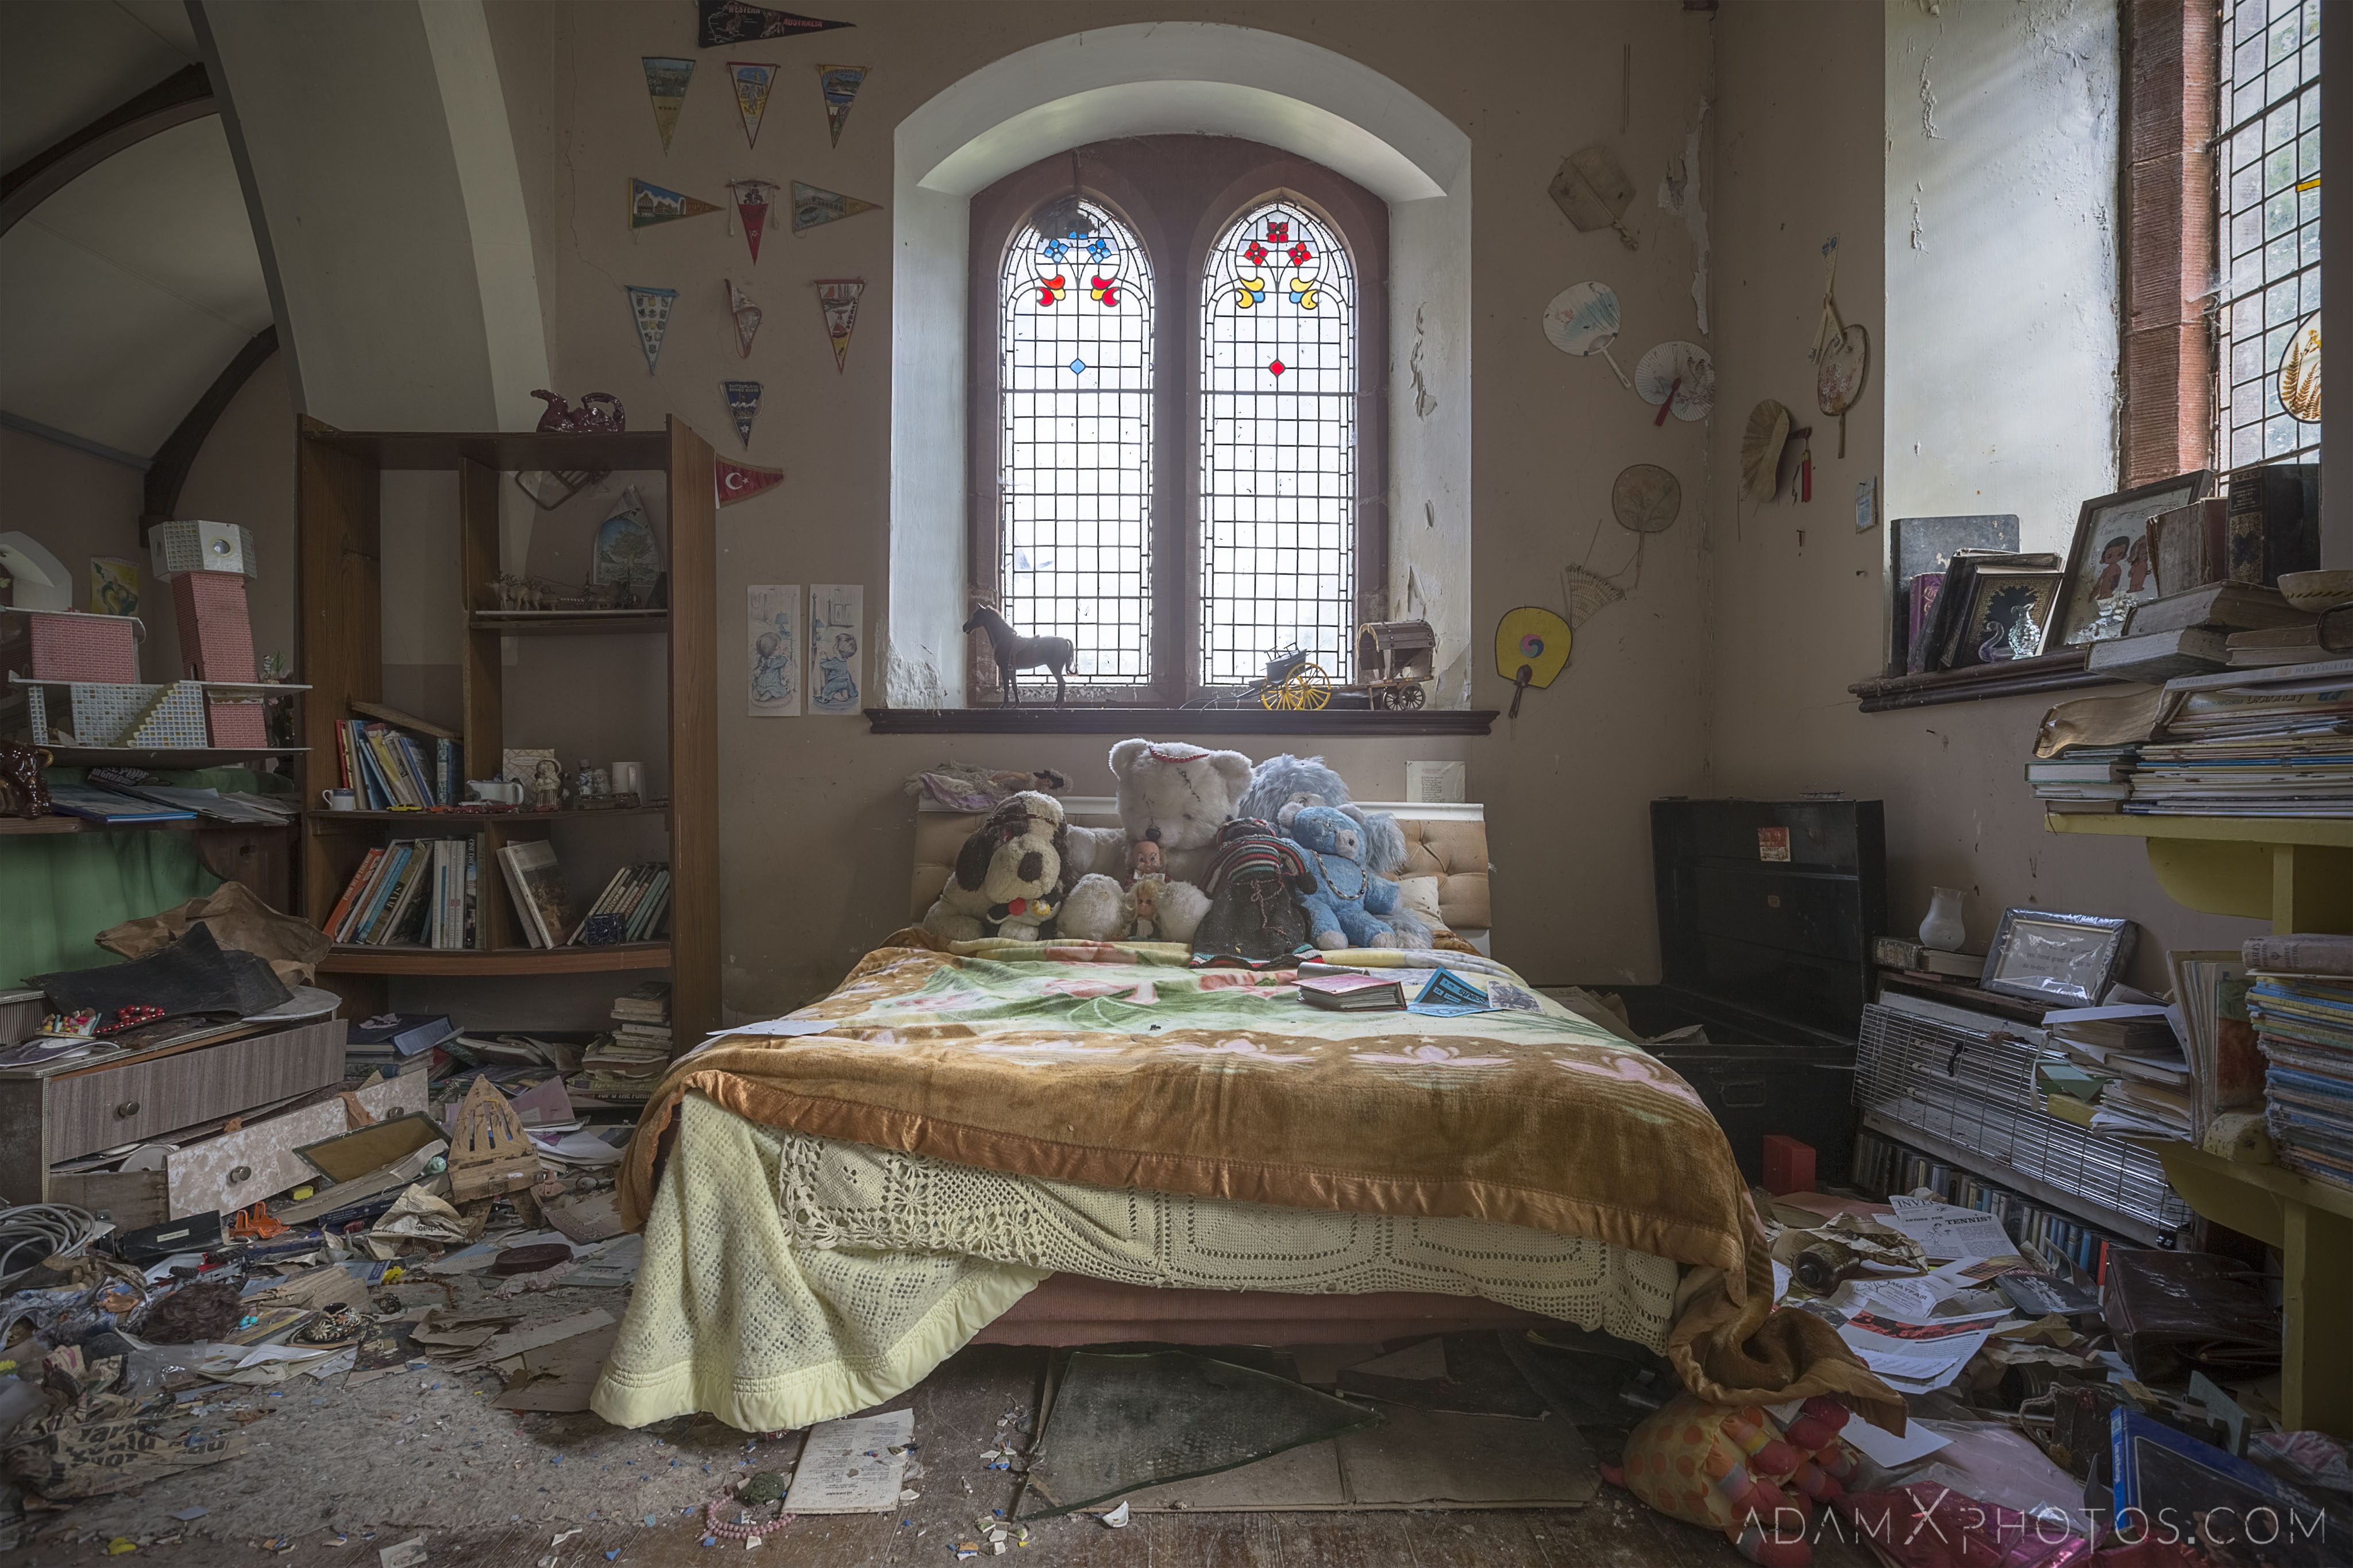 bed soft toys ornaments books stained glass windows Elvanfoot Parish Church Hoarder Hoarders Church Adam X Urbex Urban Exploration Access 2018 Abandoned decay lost forgotten derelict location creepy haunting eerie